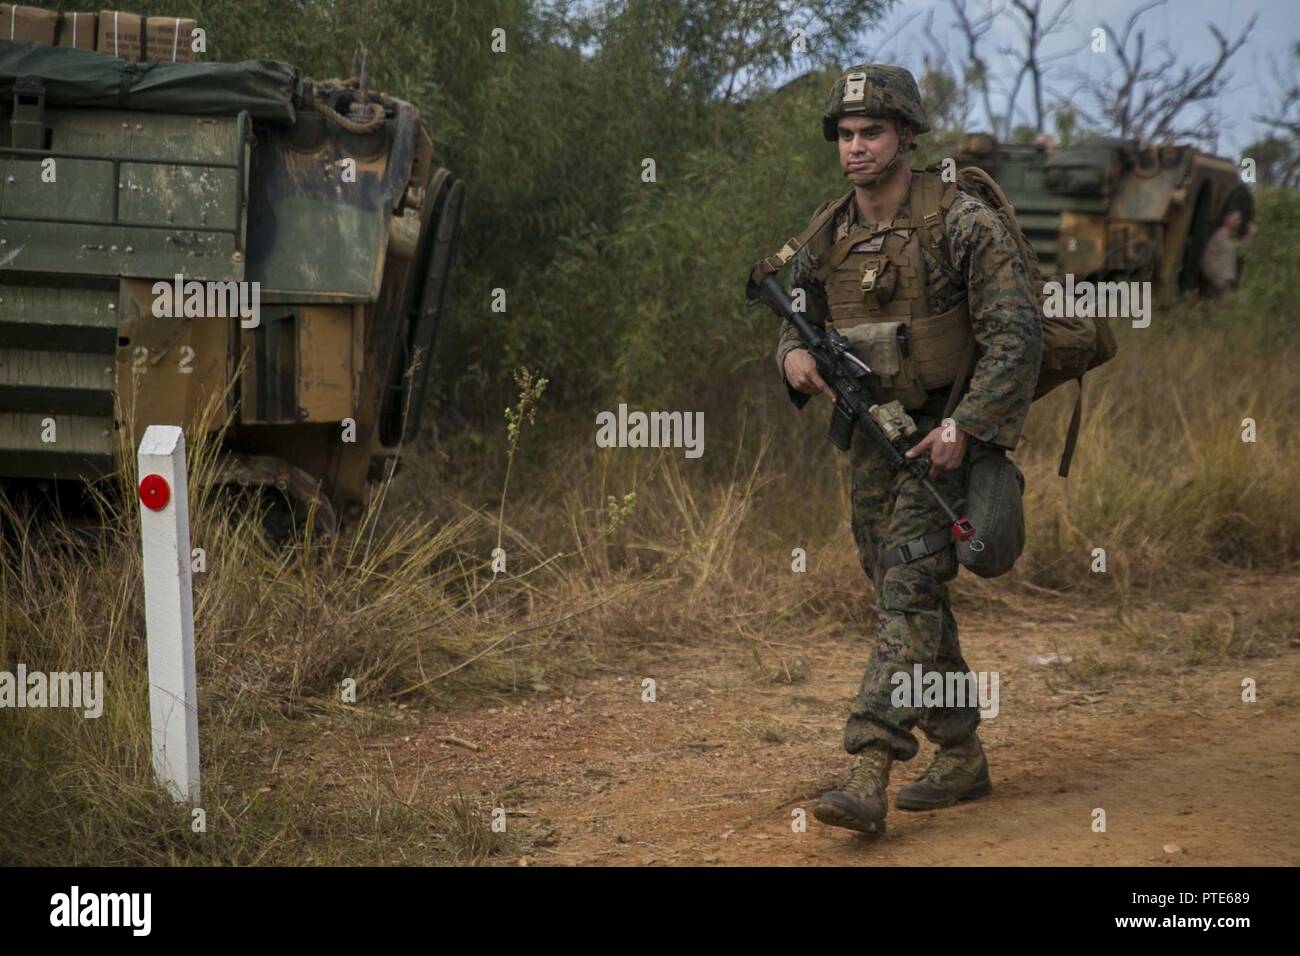 Lance Cpl. Andrew P. Carrera, a mortar man with Weapons Platoon, India Company, Battalion Landing Team, 3rd Battalion, 5th Marines, 31st Marine Expeditionary Unit, patrols through the Australia Defense Force’s Townshend Island Training Area, Queensland, Australia, during Exercise Talisman Saber 17, July 14, 2017. The company’s simulated mission included clearing and securing the training area. India Company is the mechanized raid company for the 31st MEU, currently supporting Talisman Saber 17 while deployed on its scheduled patrol of the Indo-Asia-Pacific region. Talisman Saber is a biennial  Stock Photo